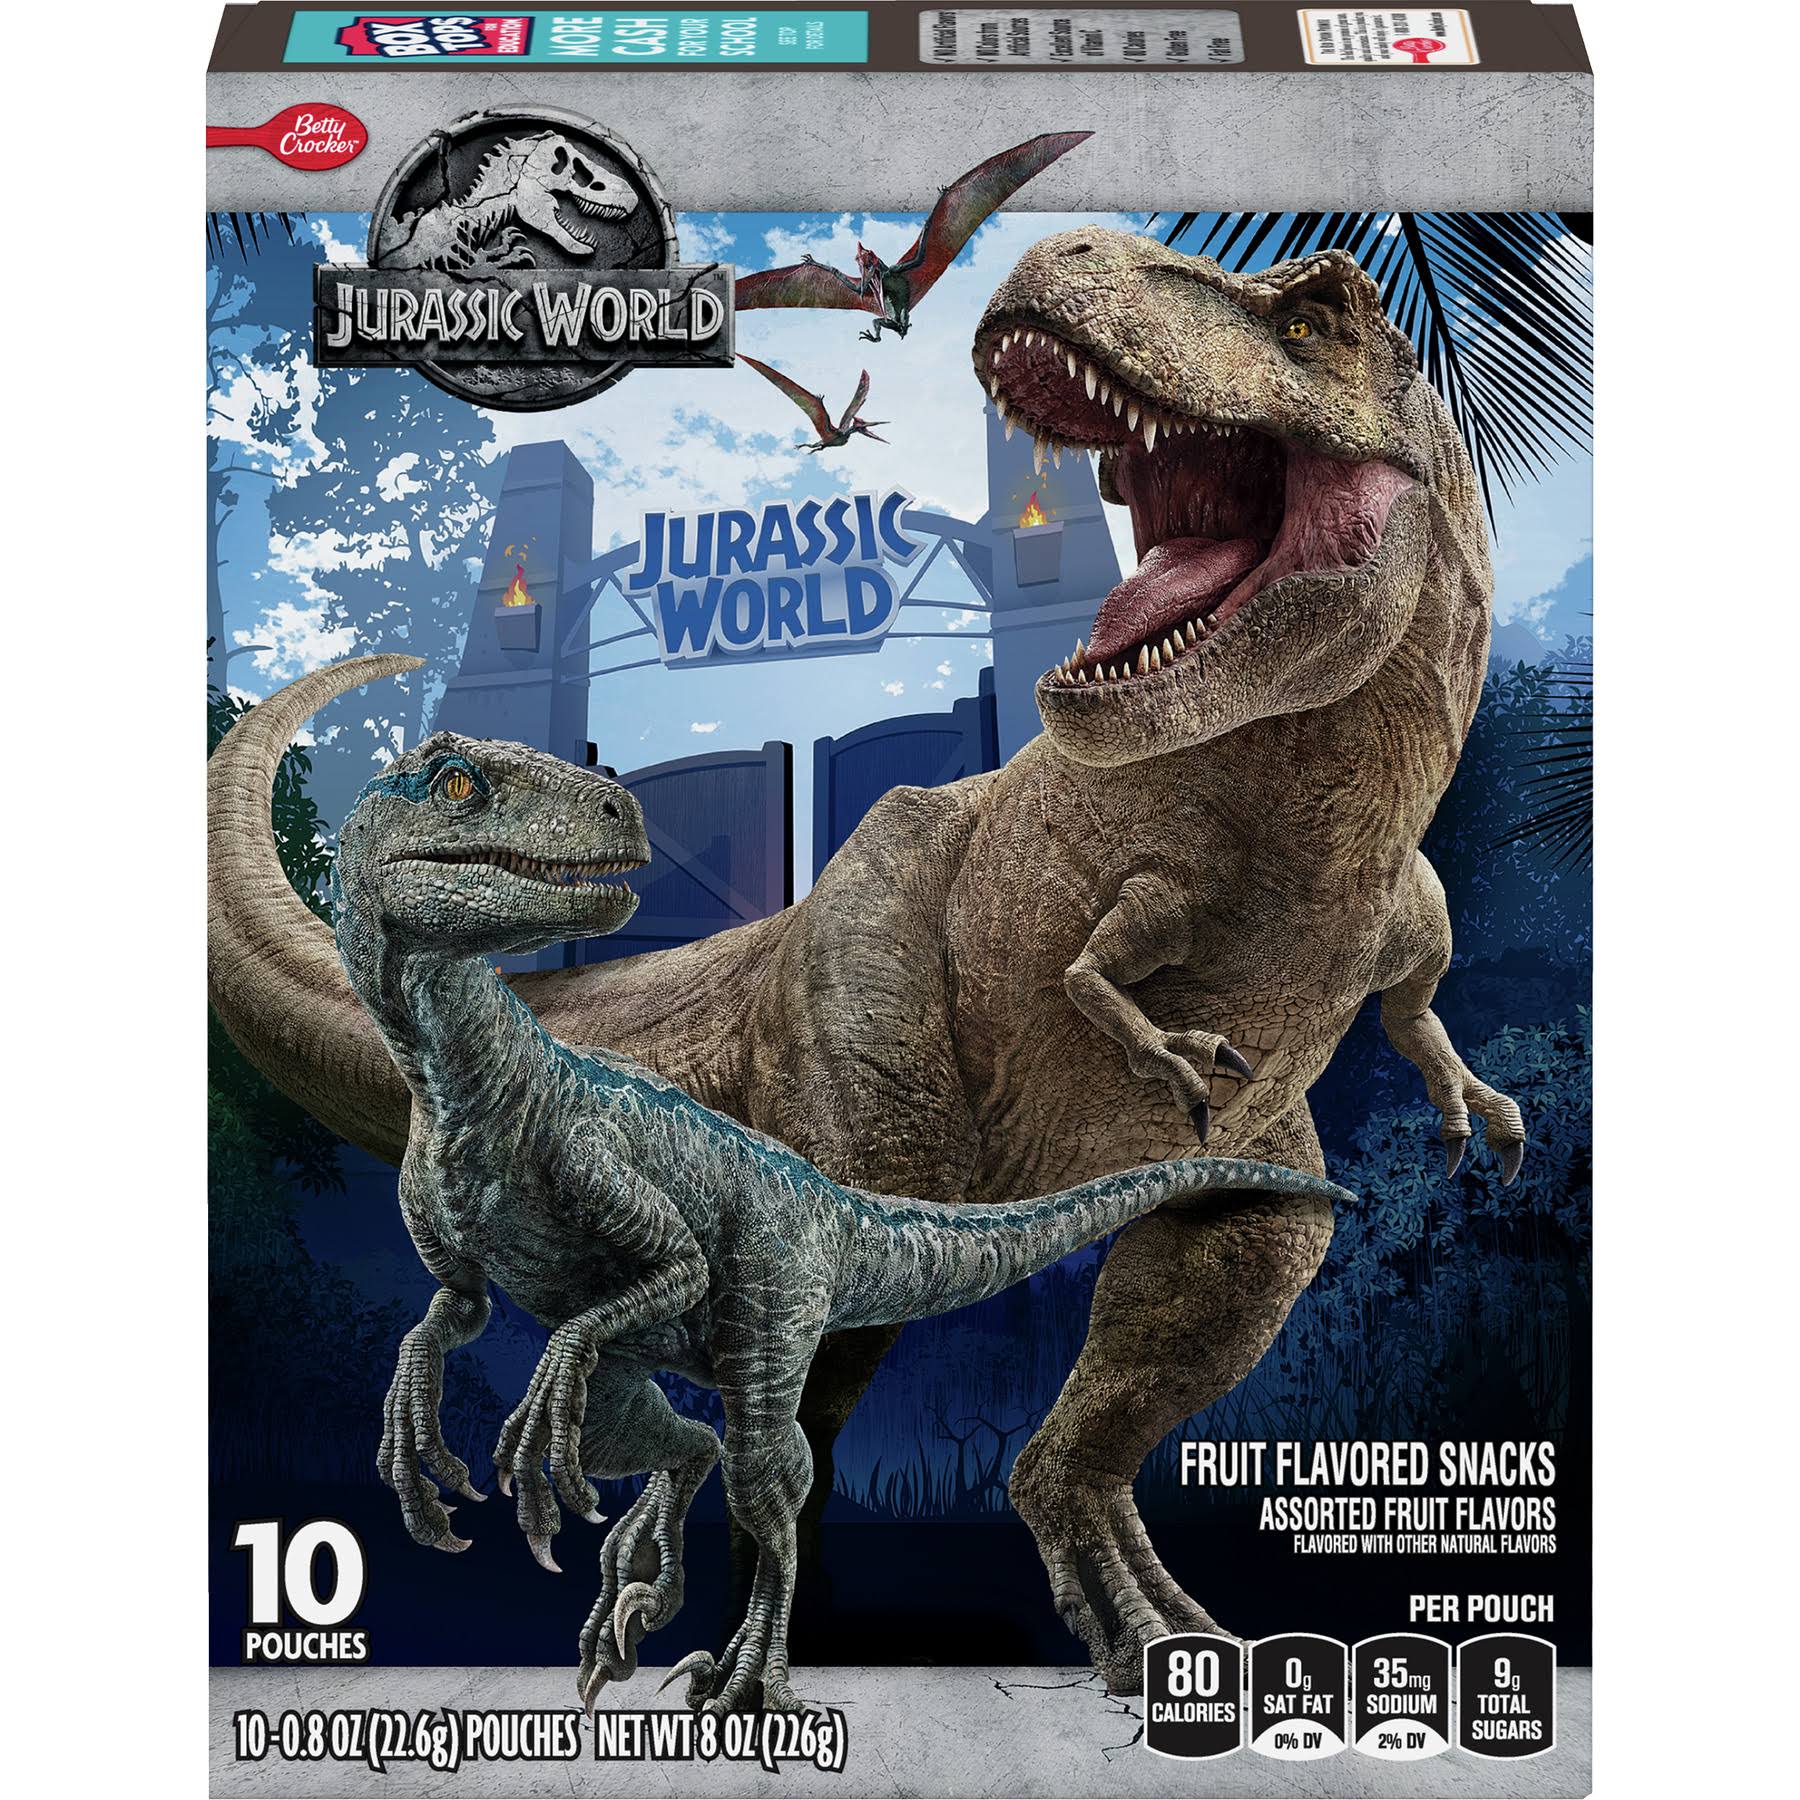 Betty Crocker Jurassic World Fruit Flavored Snacks, Assorted - 10 pack, 0.8 oz pouches